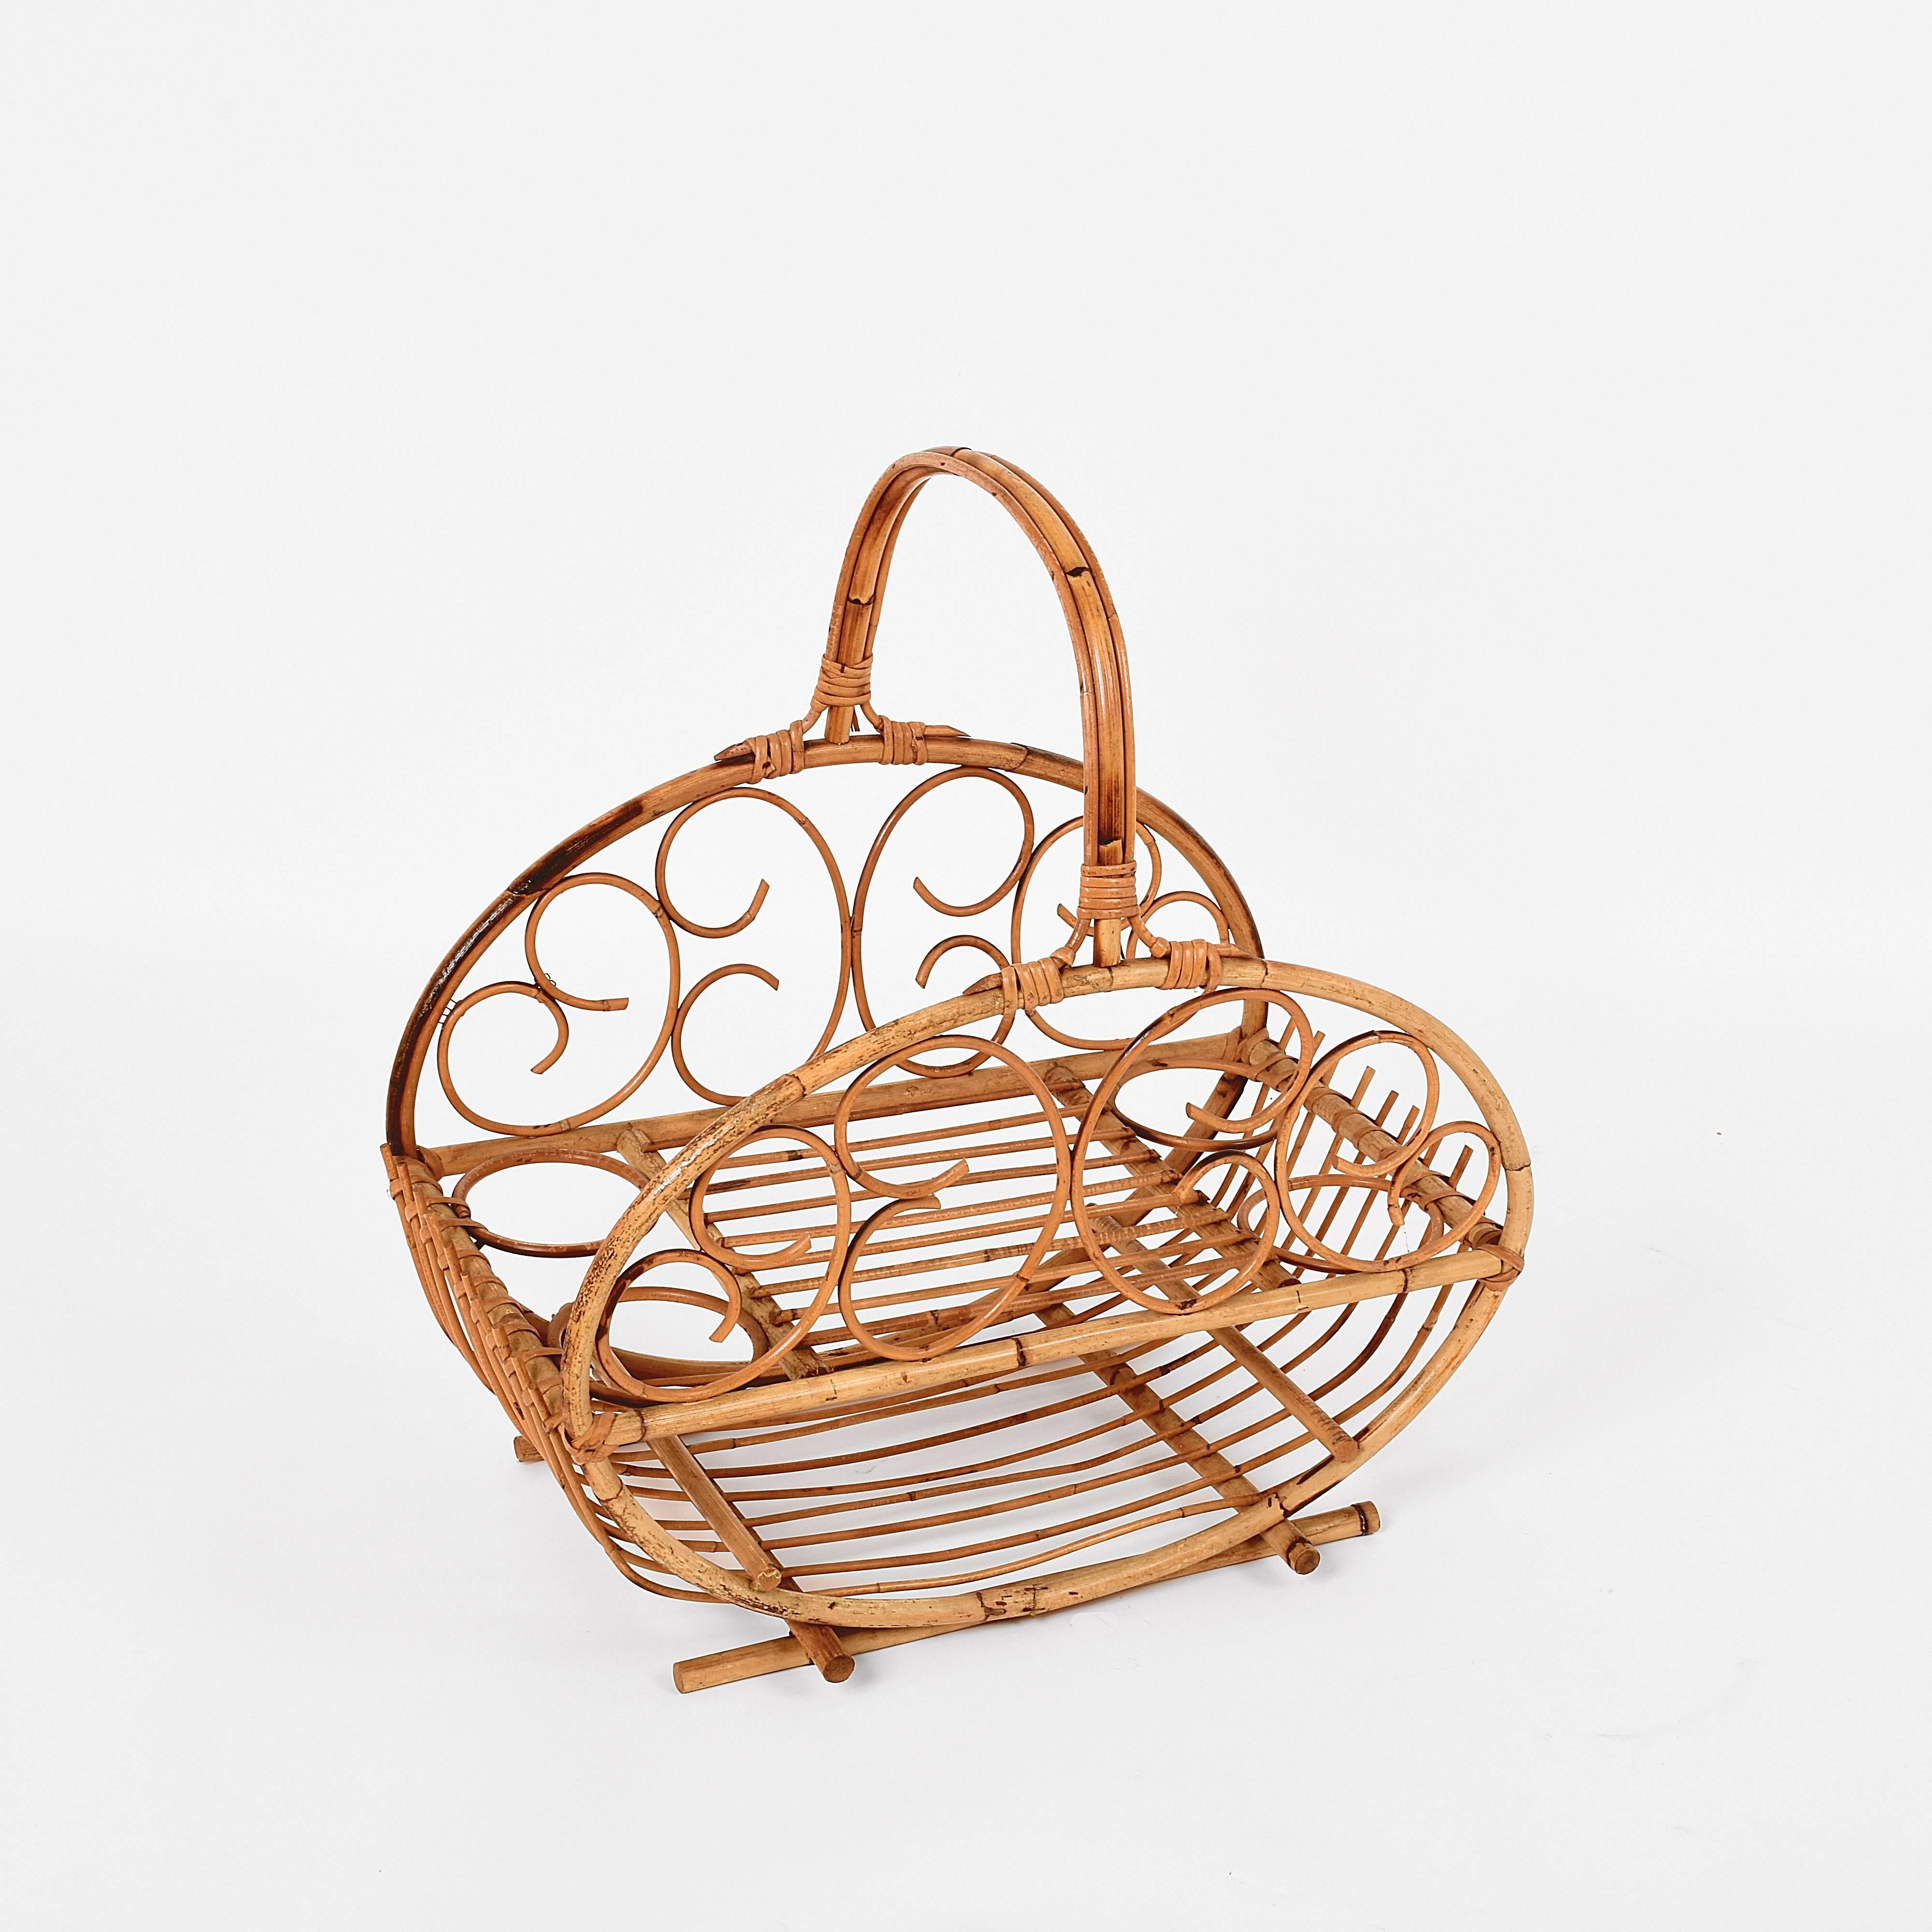 Wonderful magazine rack and a bottle holder. It was produced in Italy during 1960s.

It is made of bamboo and rattan, with two shelves for magazines, a smaller one on the top and a larger one on the bottom. The bottle holders are on the external